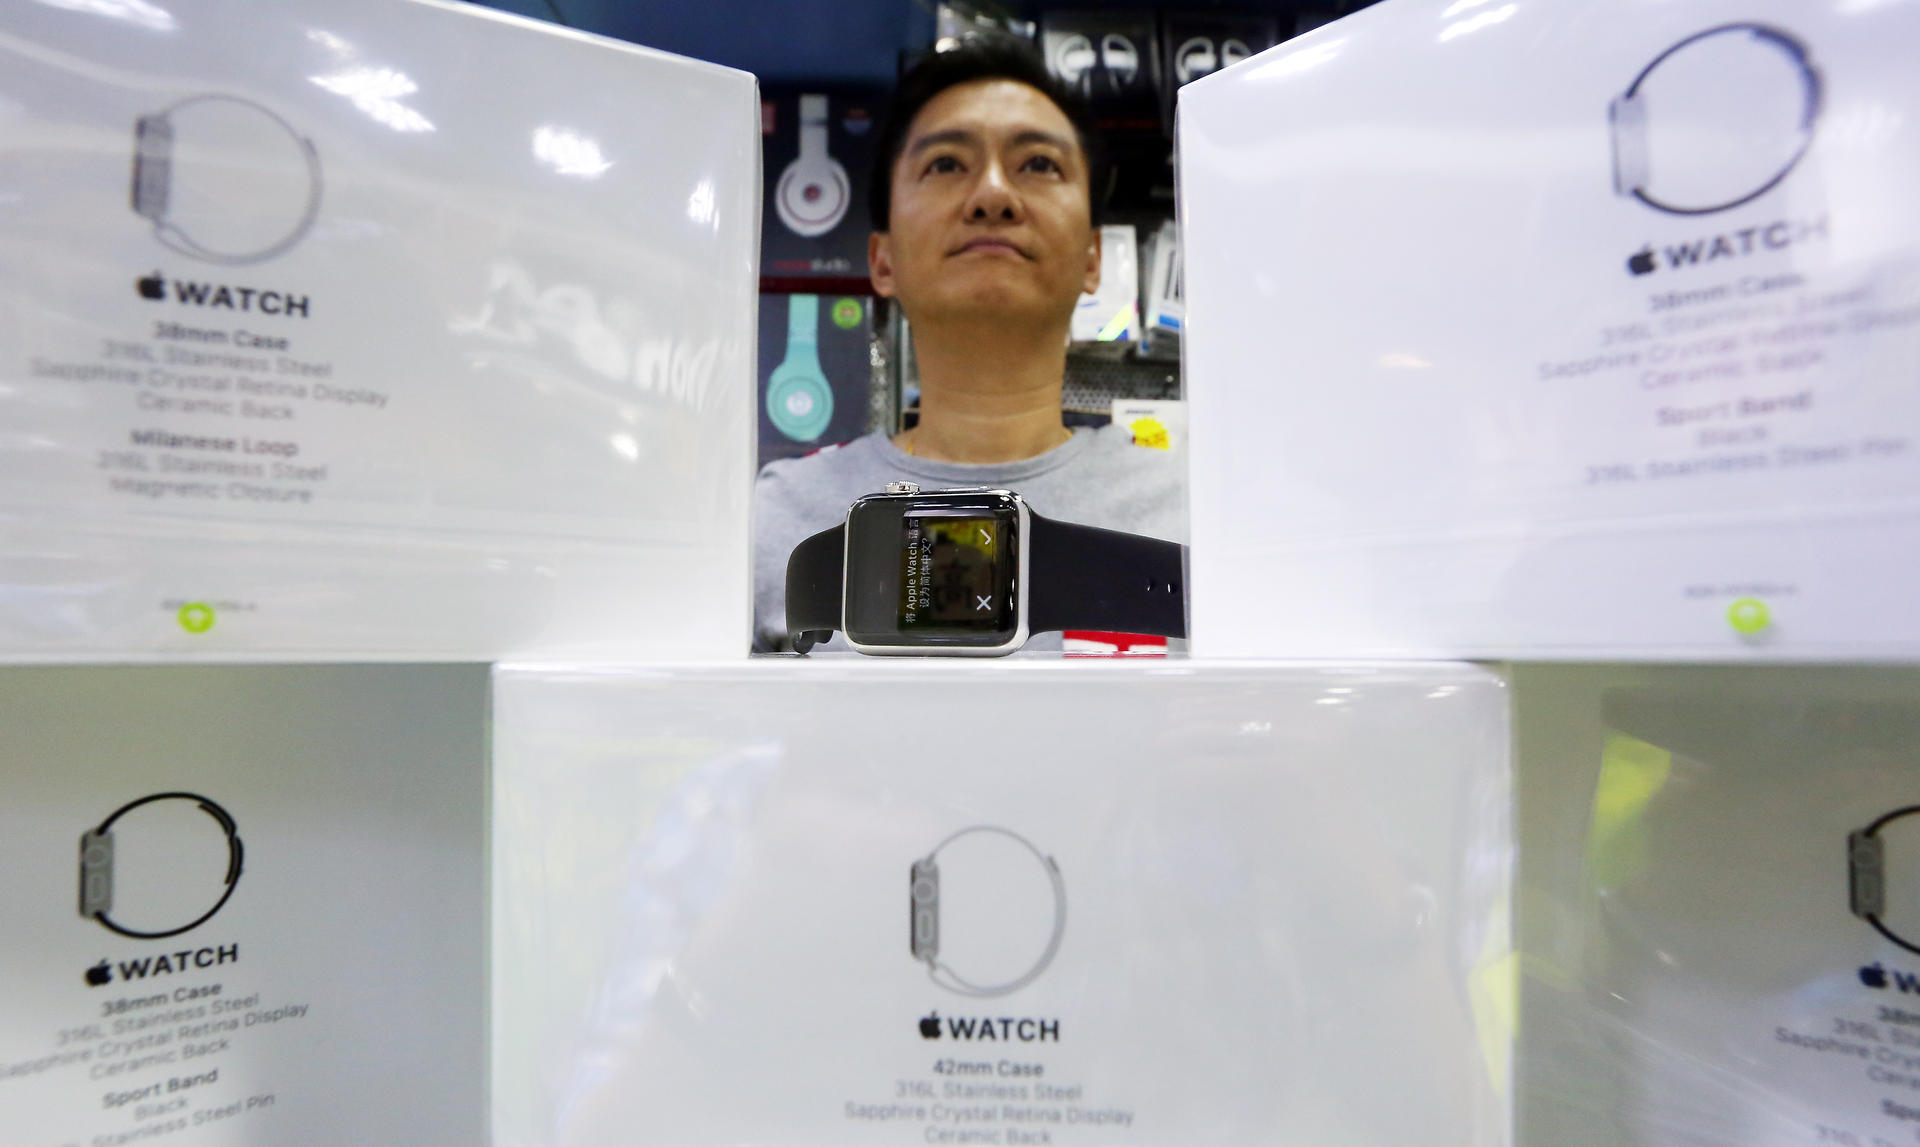 Mong Kok store owner Lo Lau Chi-kwong says the Apple Watch is in short supply - he sold out of the few he got his hands on. Photo: Felix Wong